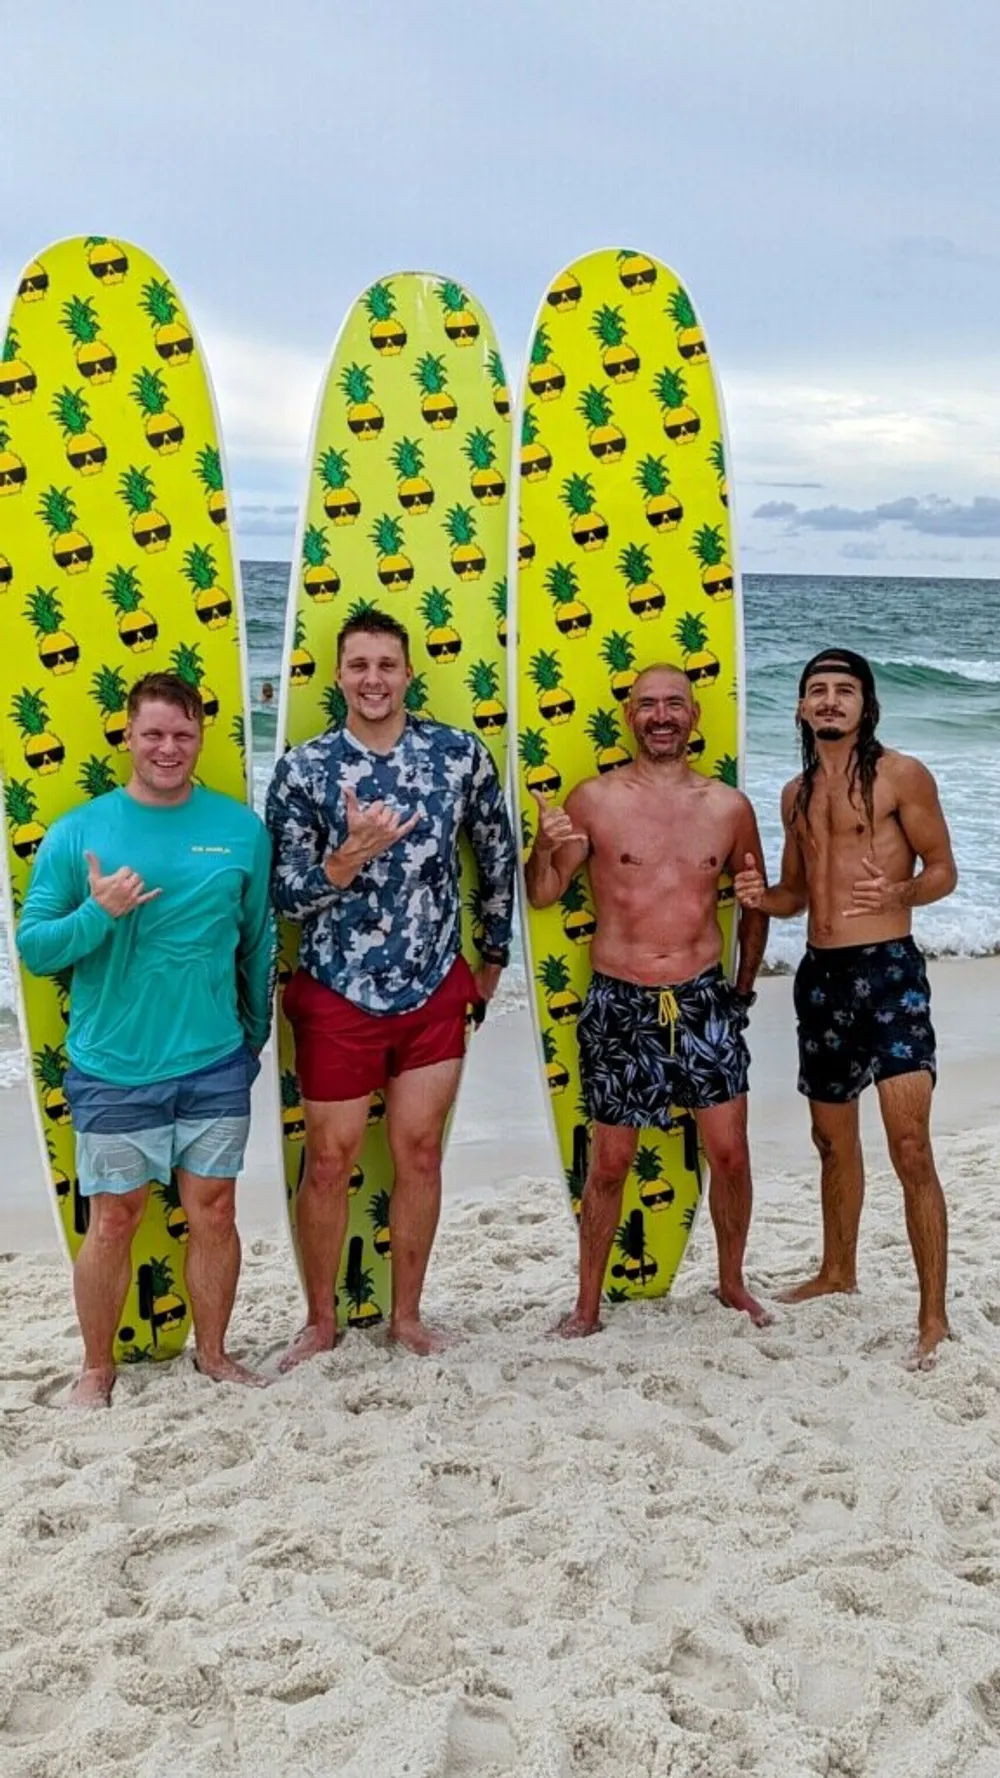 Four individuals are standing on a sandy beach each partially hidden behind bright yellow surfboards adorned with pineapple patterns appearing cheerful with a variety of hand gestures